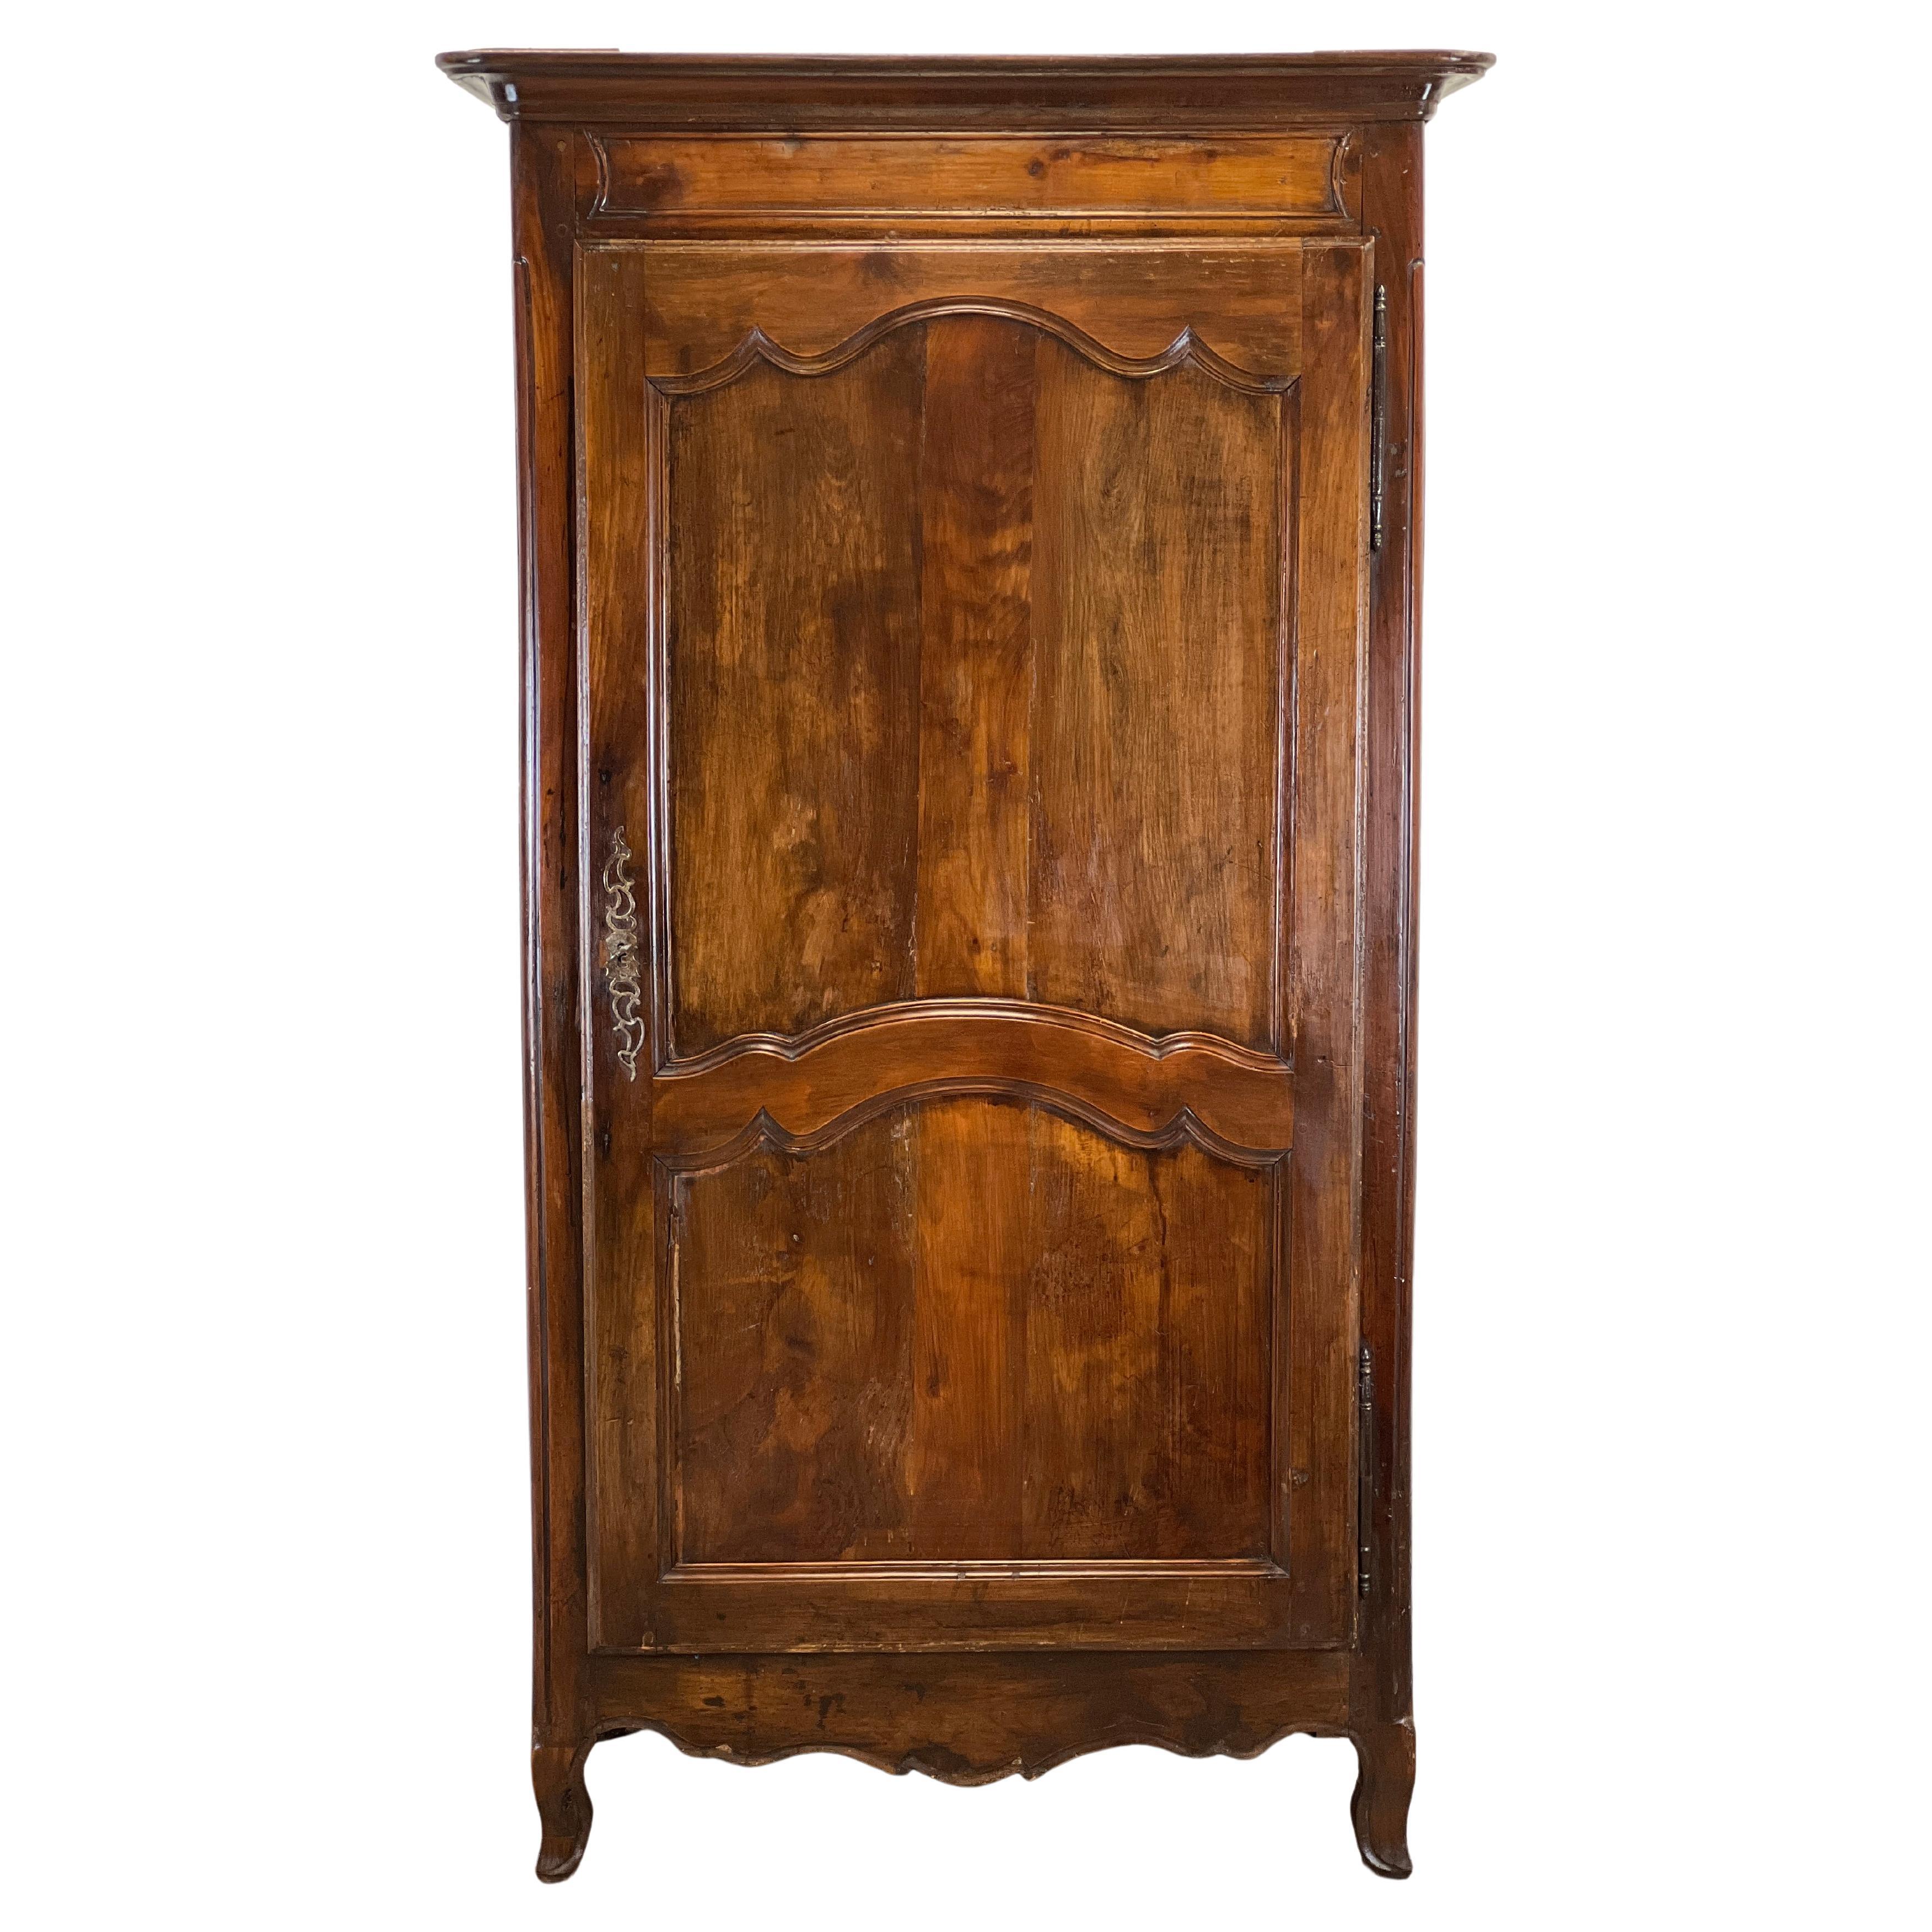 18th Century French Bonnetiere Armoire Cabinet